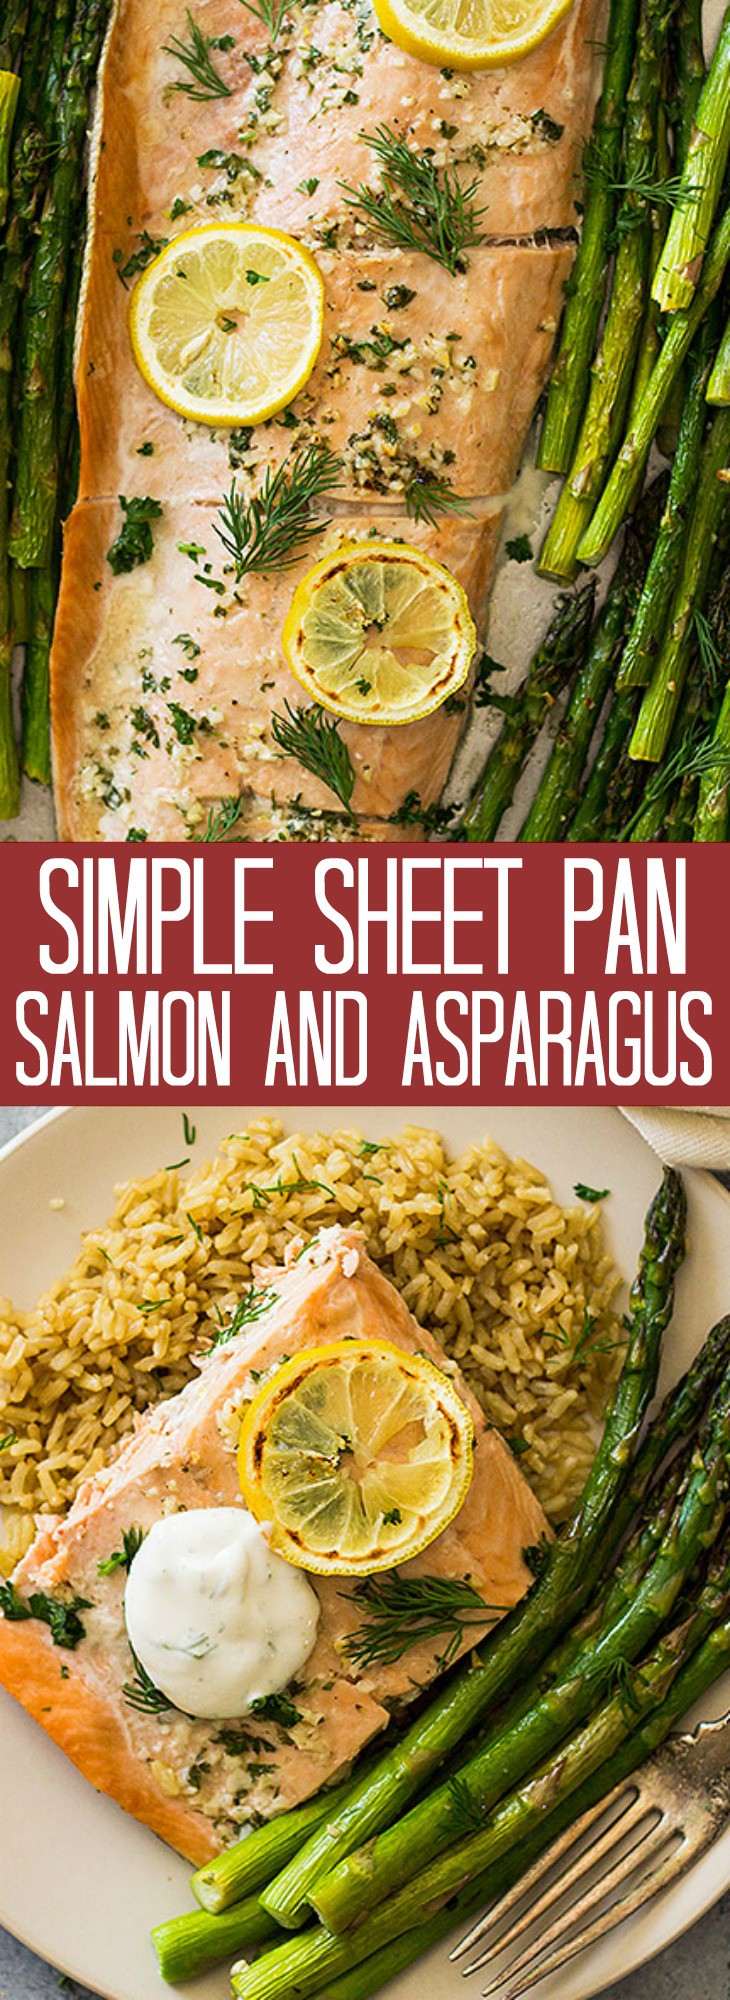 This Simple Sheet Pan Salmon and Asparagus is dinner made on one sheet pan and on your table in 20 minutes! | www.countrysidecravings.com